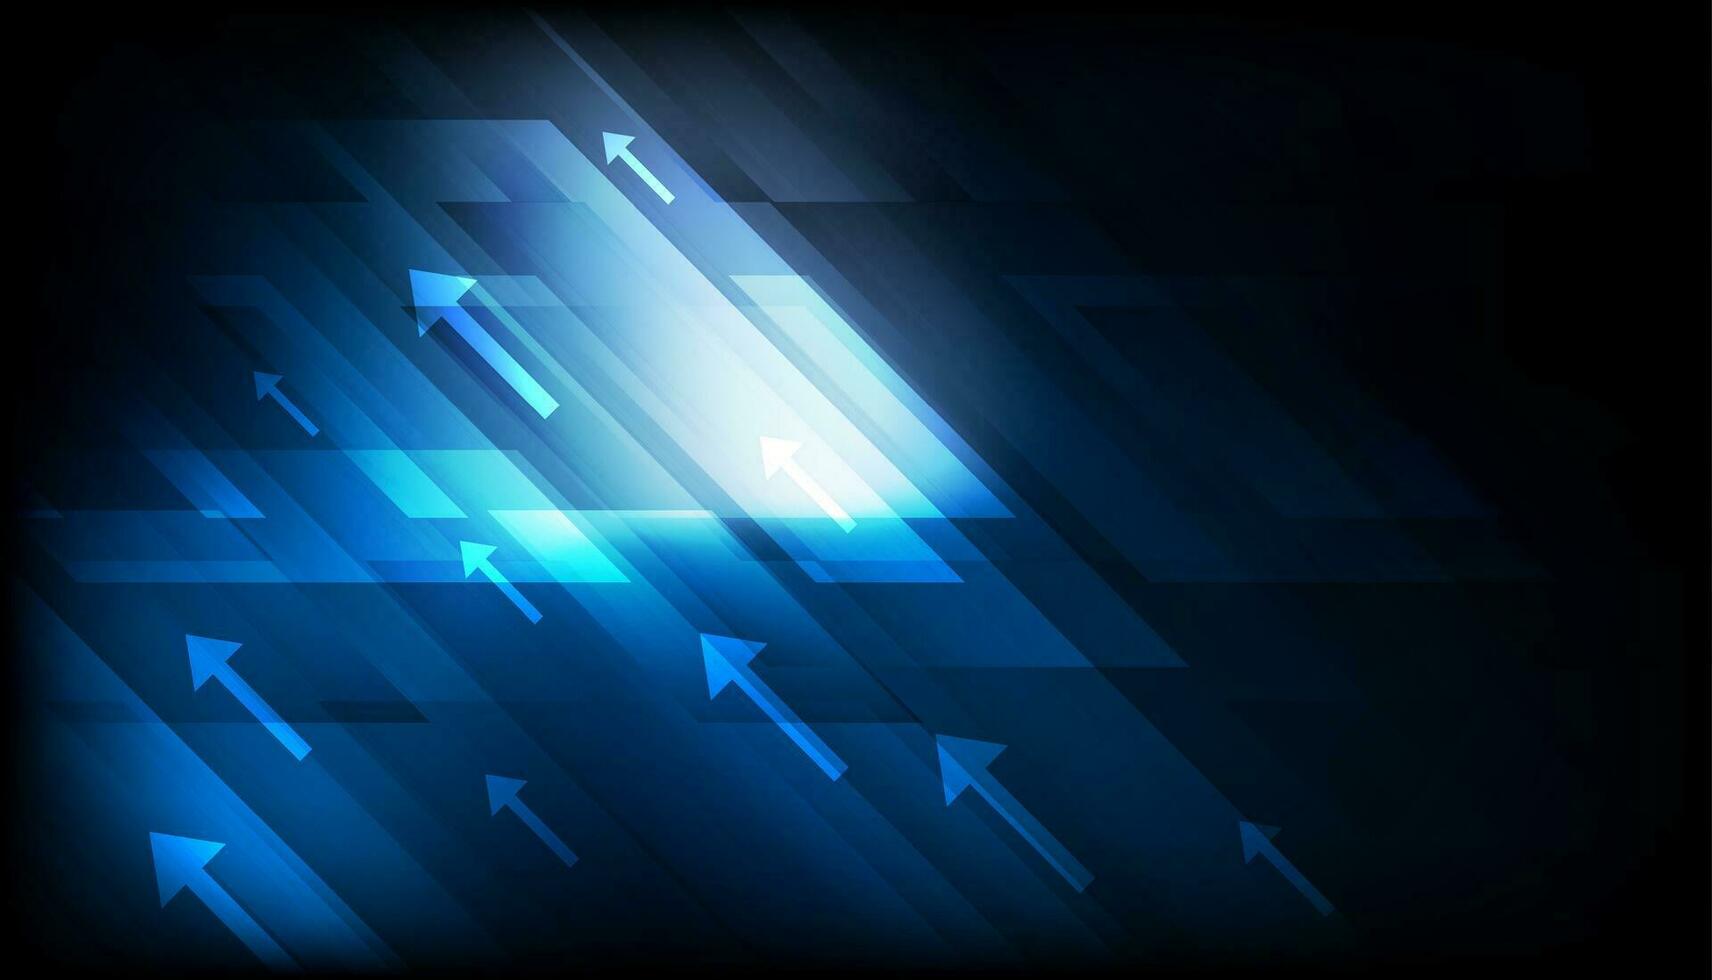 Dark blue abstract technology background with arrows vector